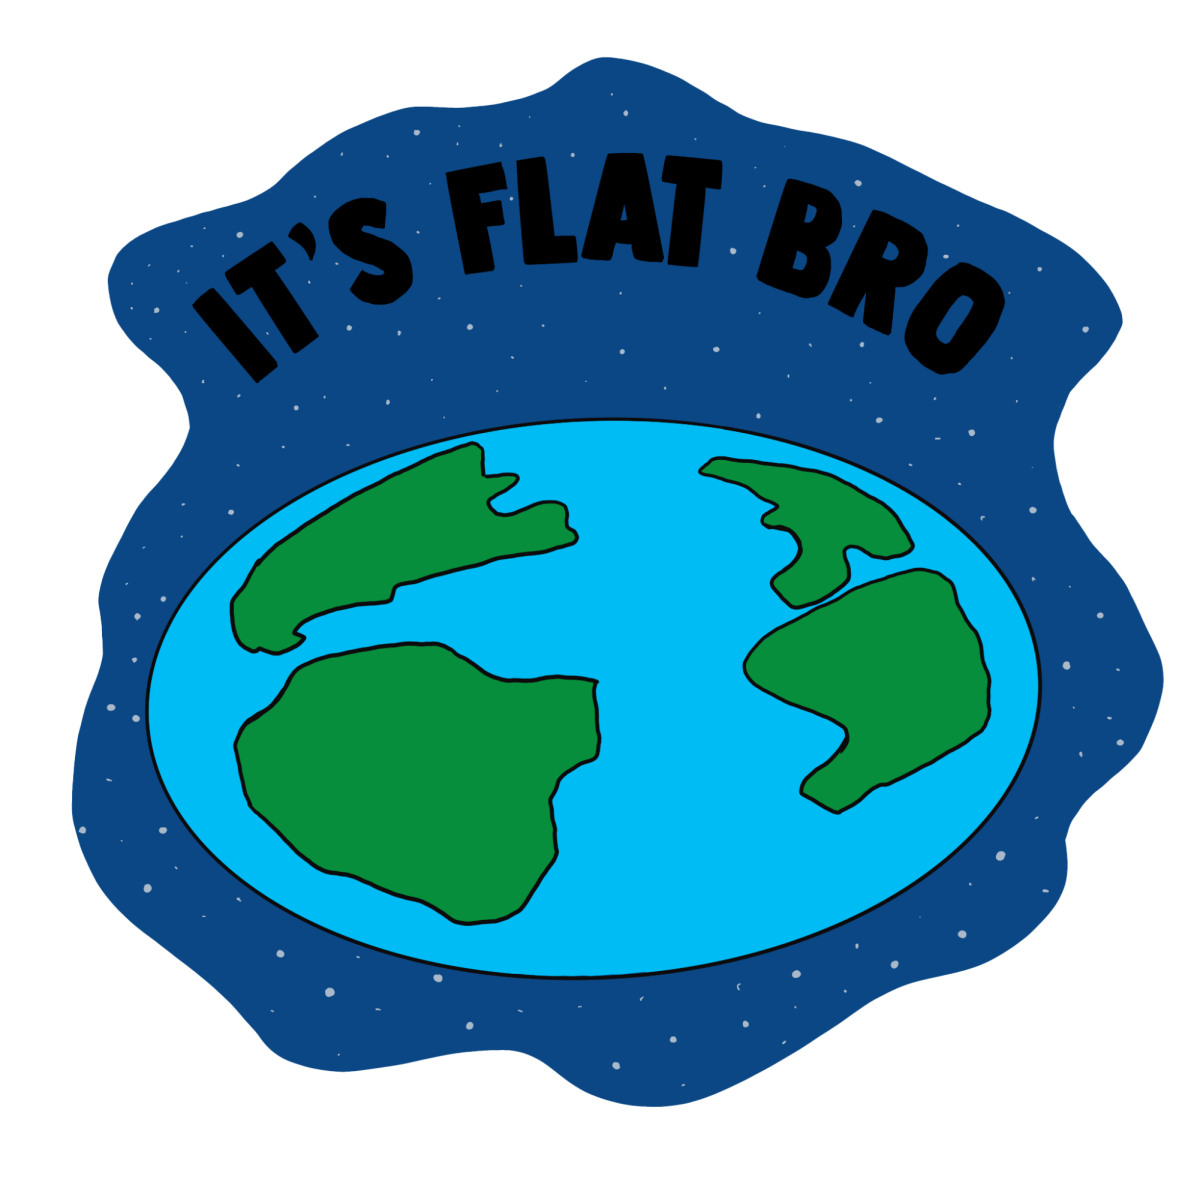 OPINION%3A+The+consequences+of+flat+earthers